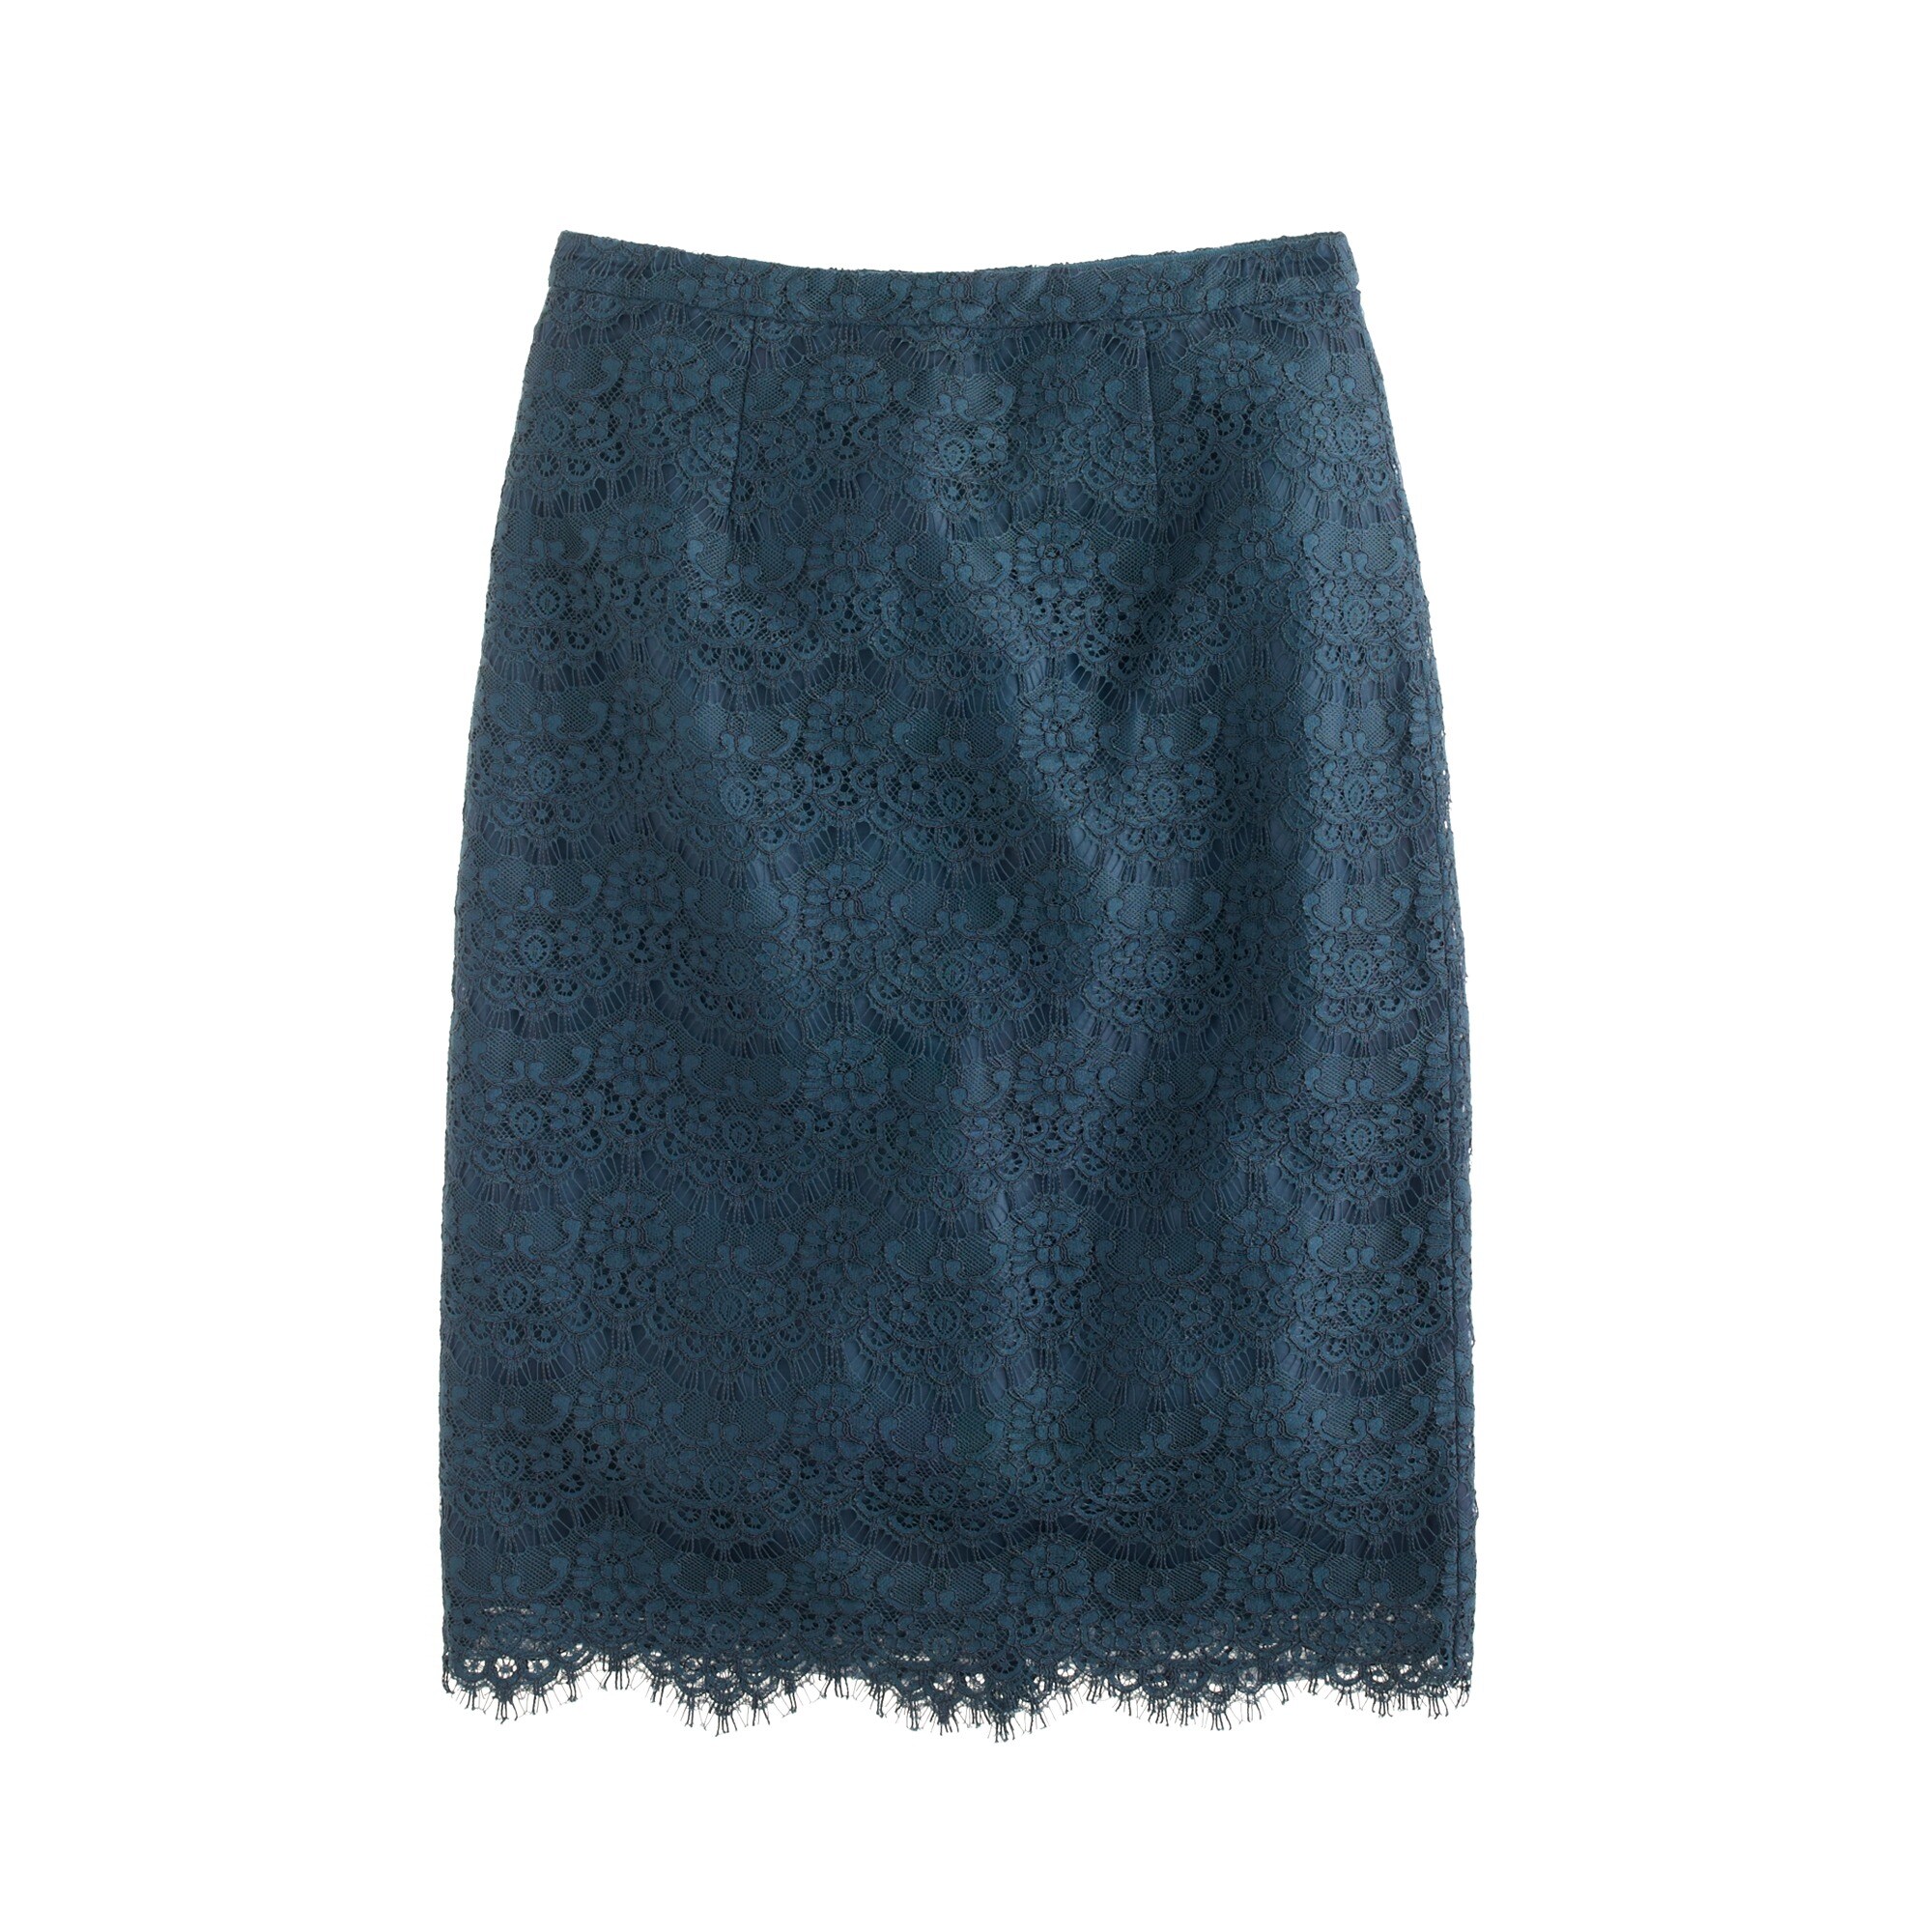 Collection pencil skirt in scalloped lace : Women pencil | J.Crew